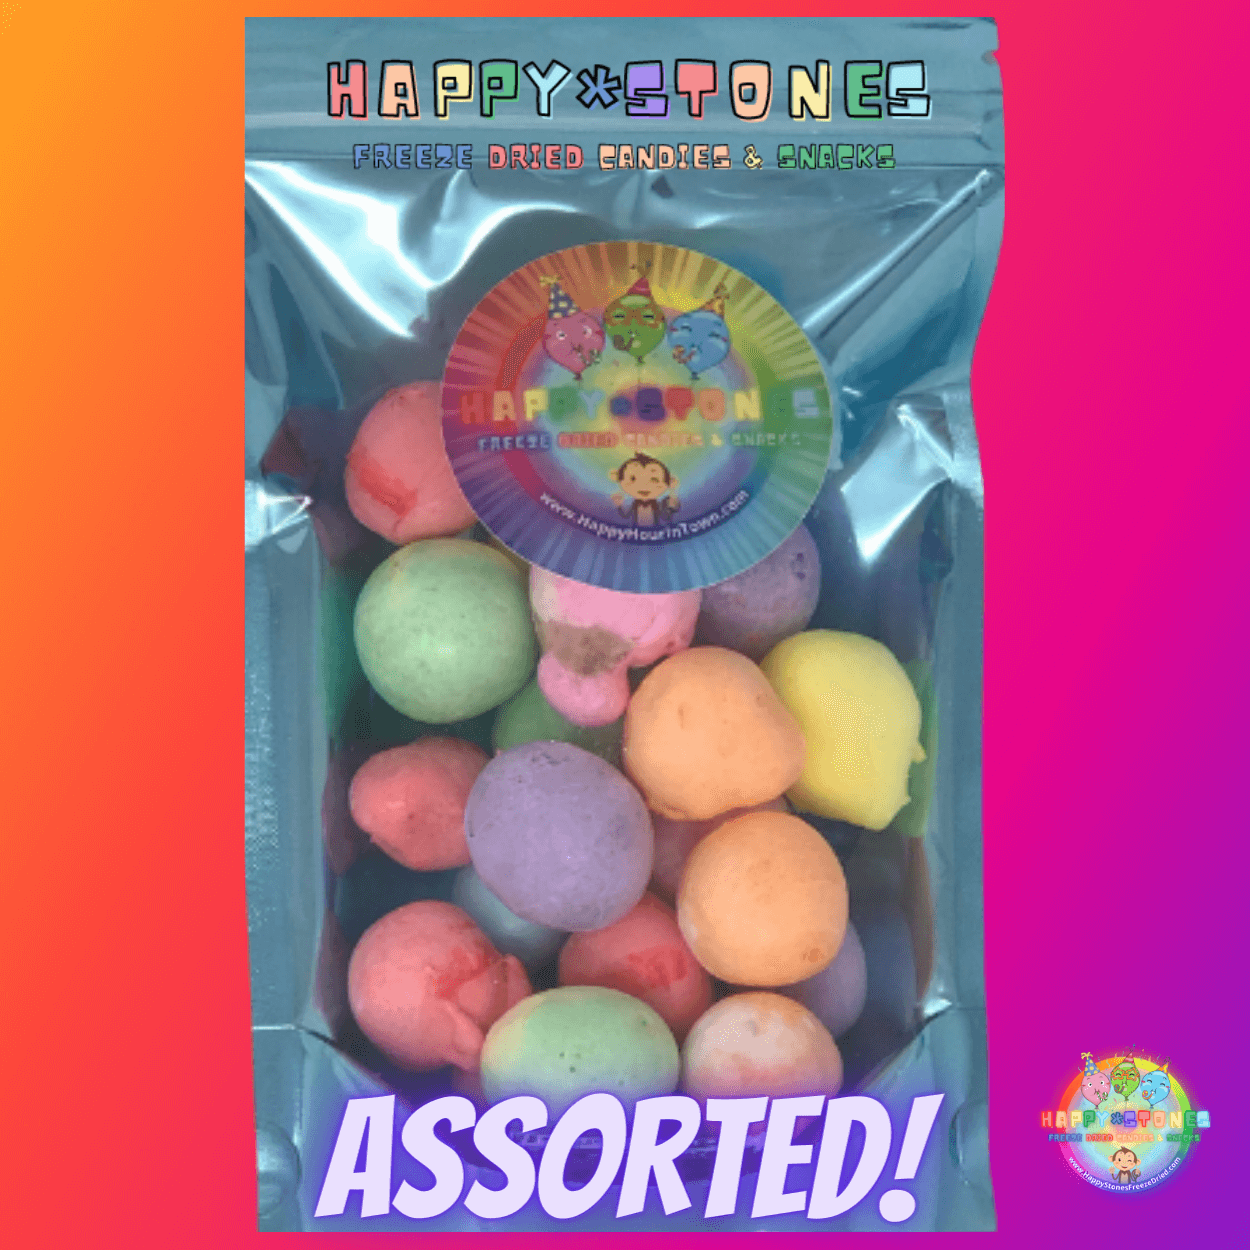 Freeze Dried Salt Water Taffy Candy You Can Eat With Braces - Assorted Flavors